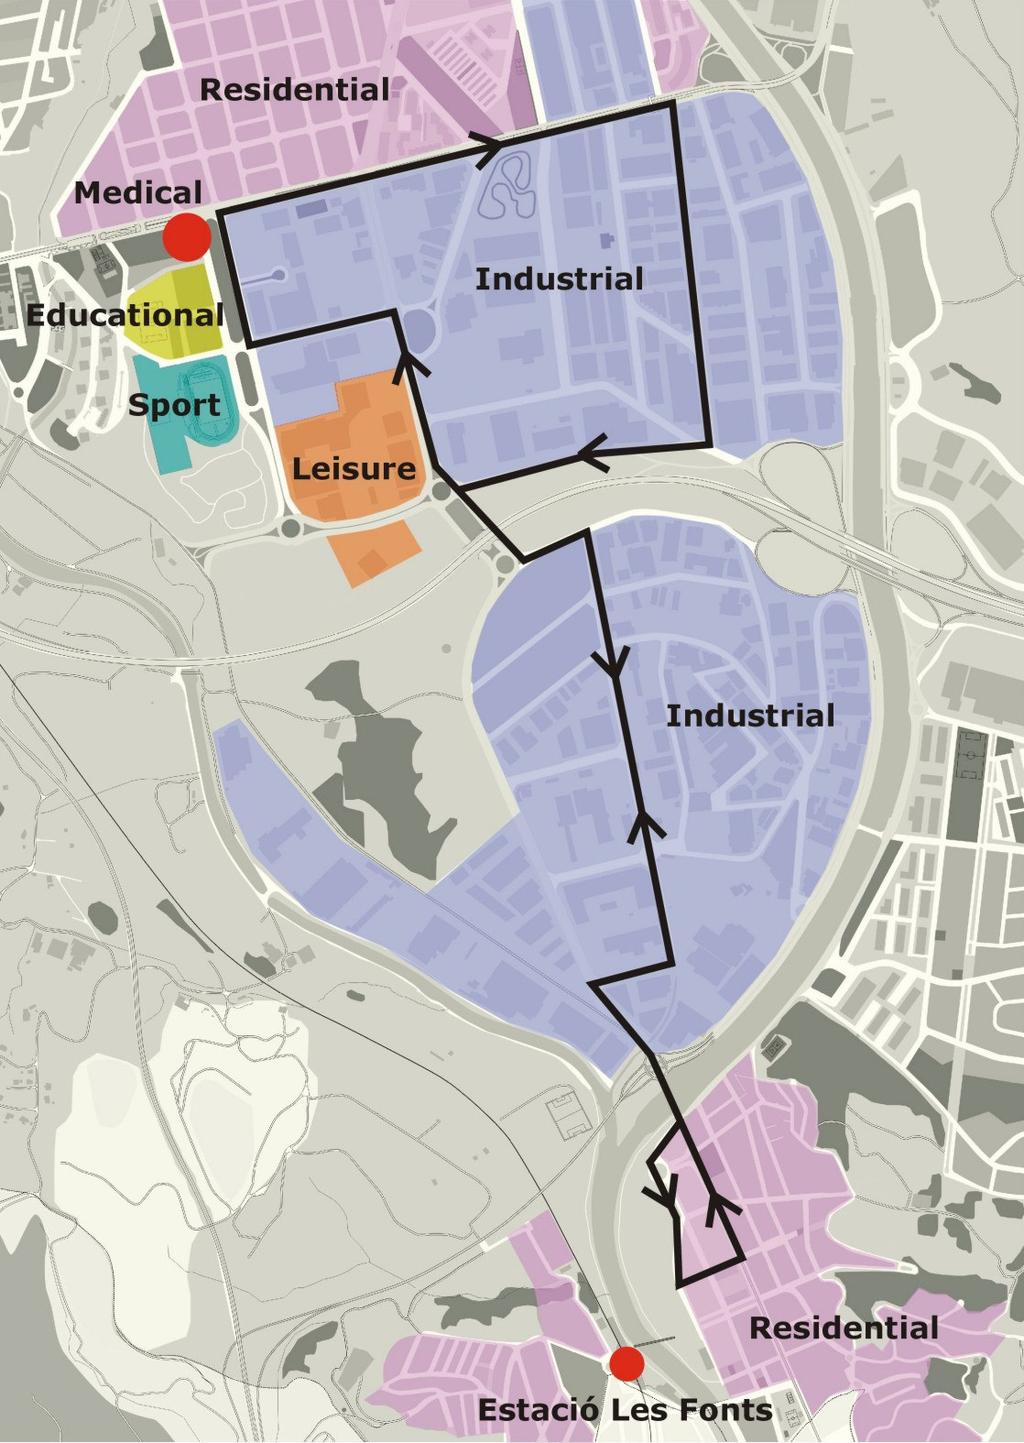 CHARACTERISITCS OF THE INDUSTRIAL PARKS Located at the southern part of the city of